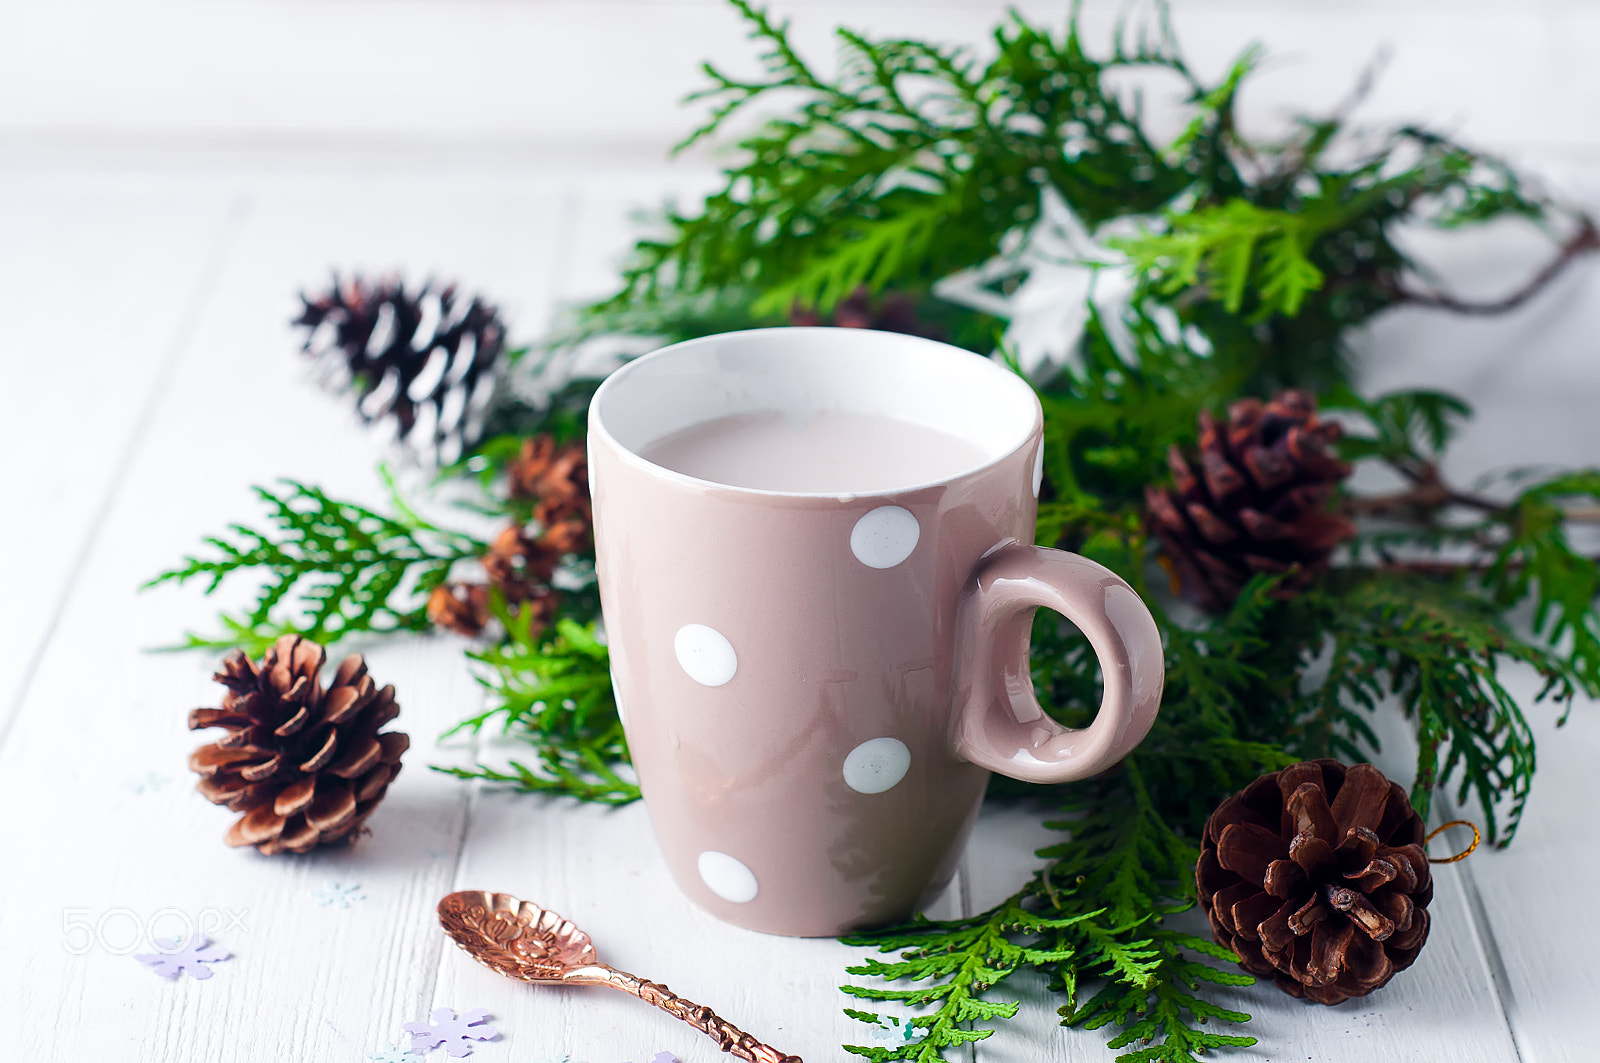 Nikon D90 sample photo. Vintage cup of hot cocoa on wooden background decorated with spruce and pine cones, photography